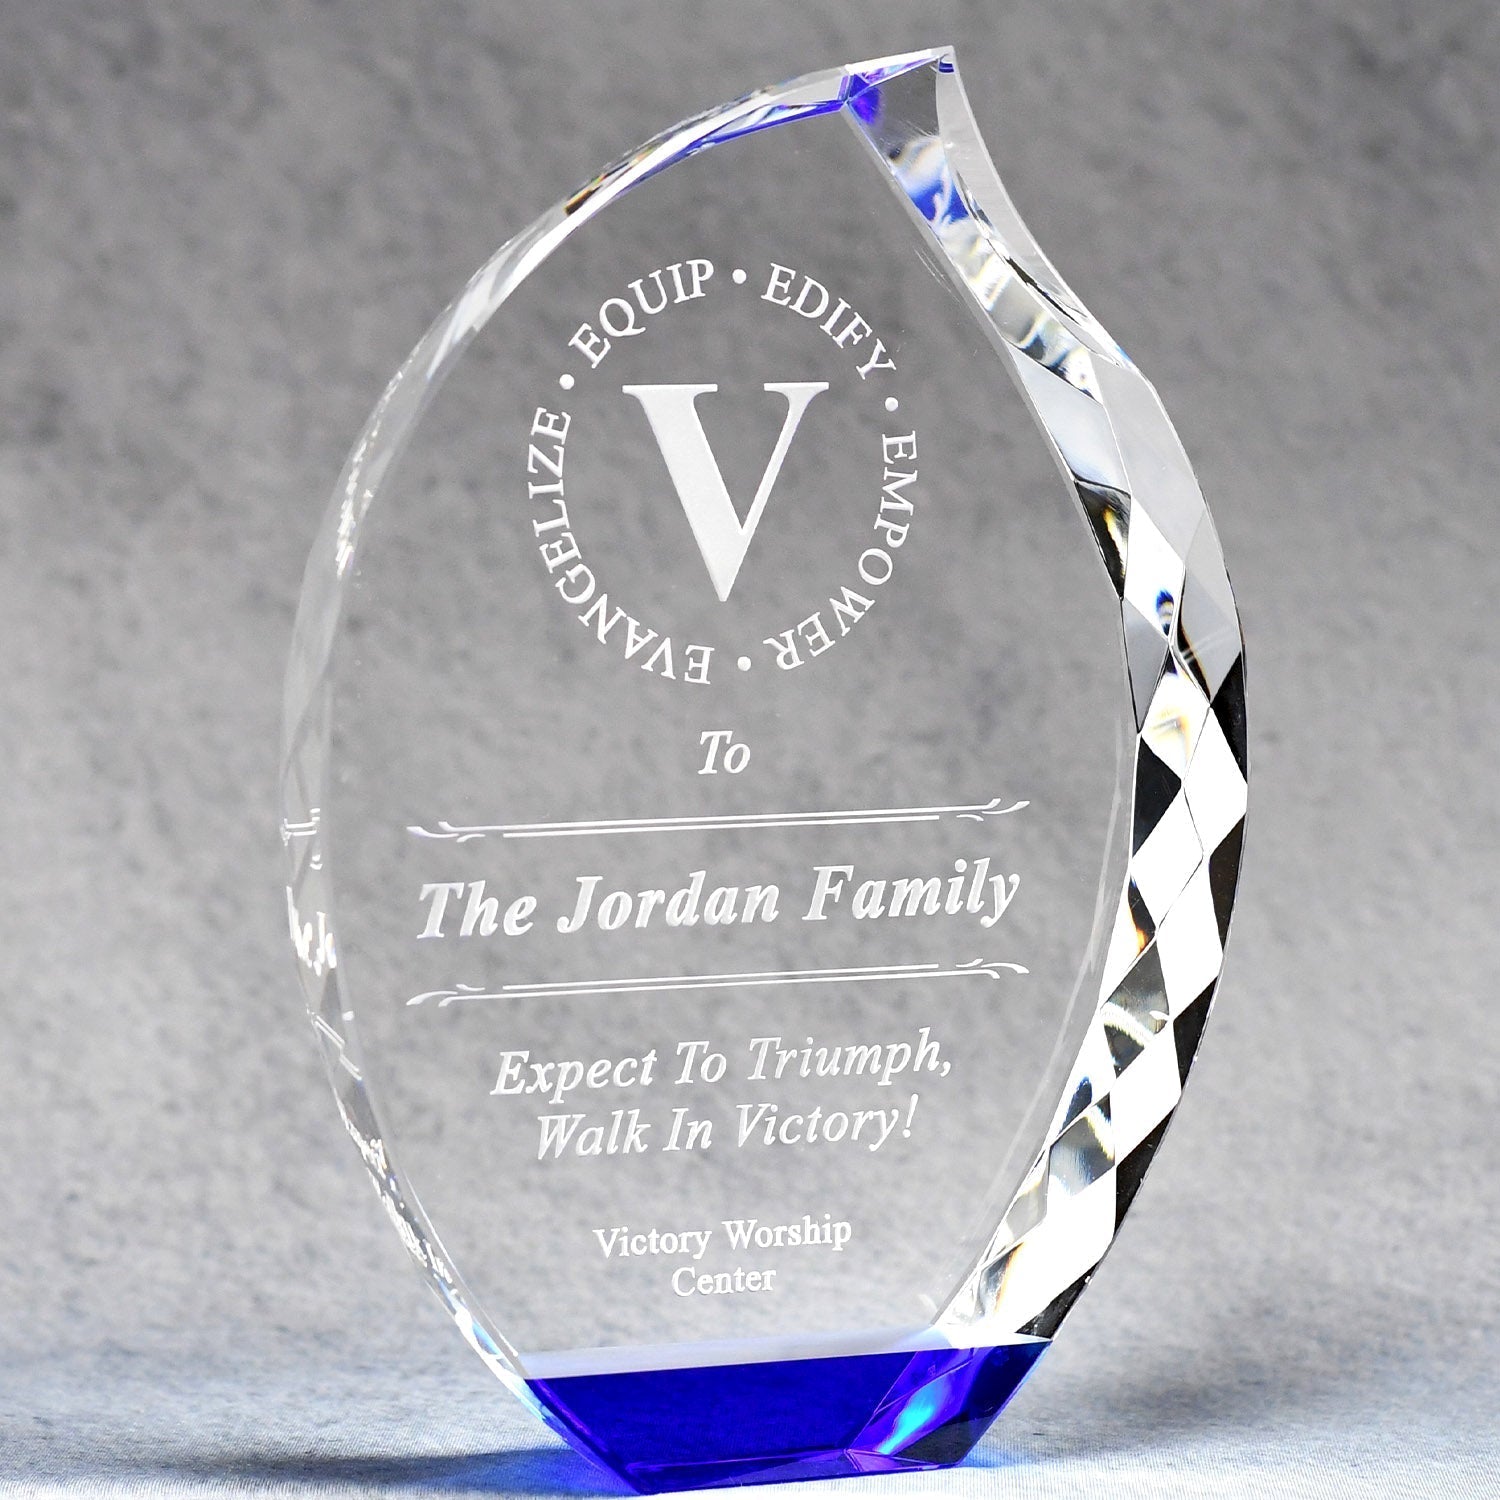 Multi-Faceted Crystal Flame With Blue Base | Alliance Awards LLC.